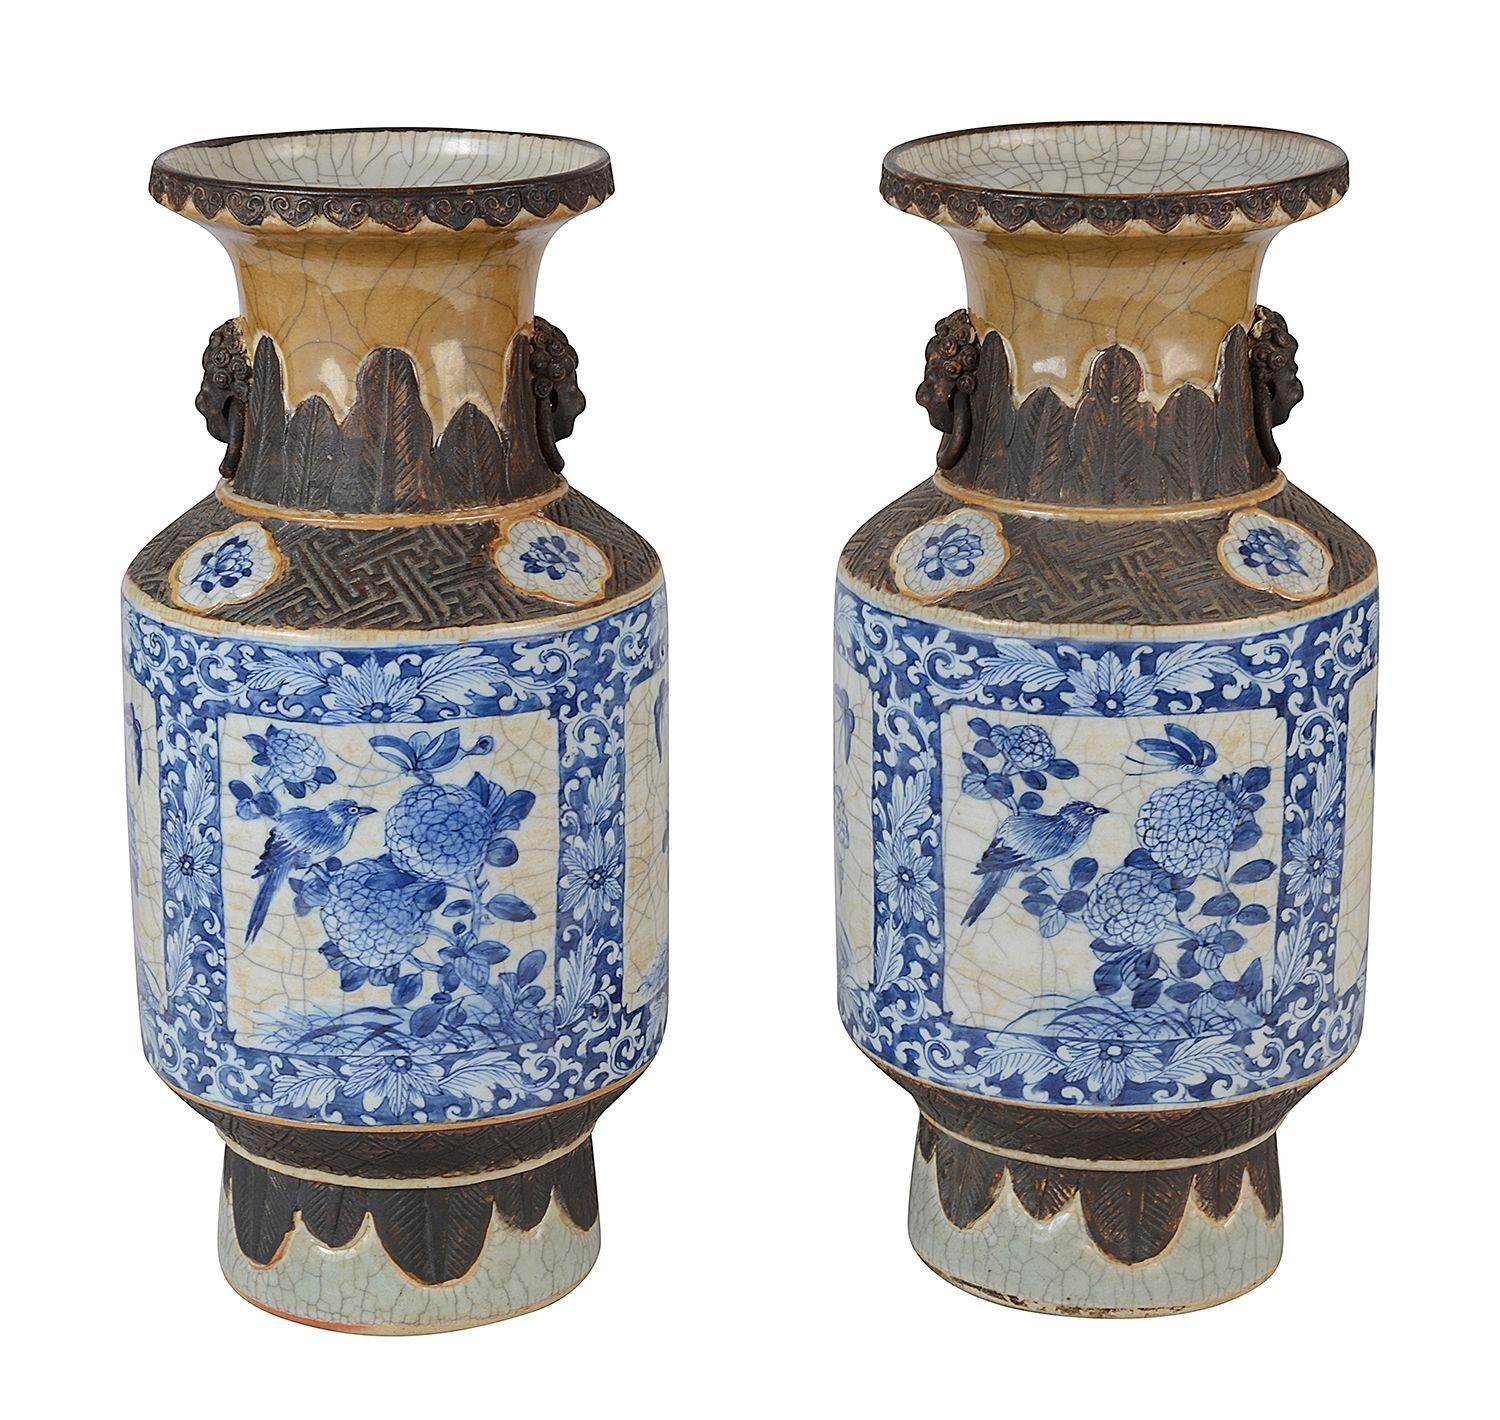 A good quality pair of late 19th Century Chinese export Blue and White crackleware vases / lamps.
Each with faux bronze mounts above and below the central blue and white hand painted scenes of birds perched on the branches of exotic flowers,